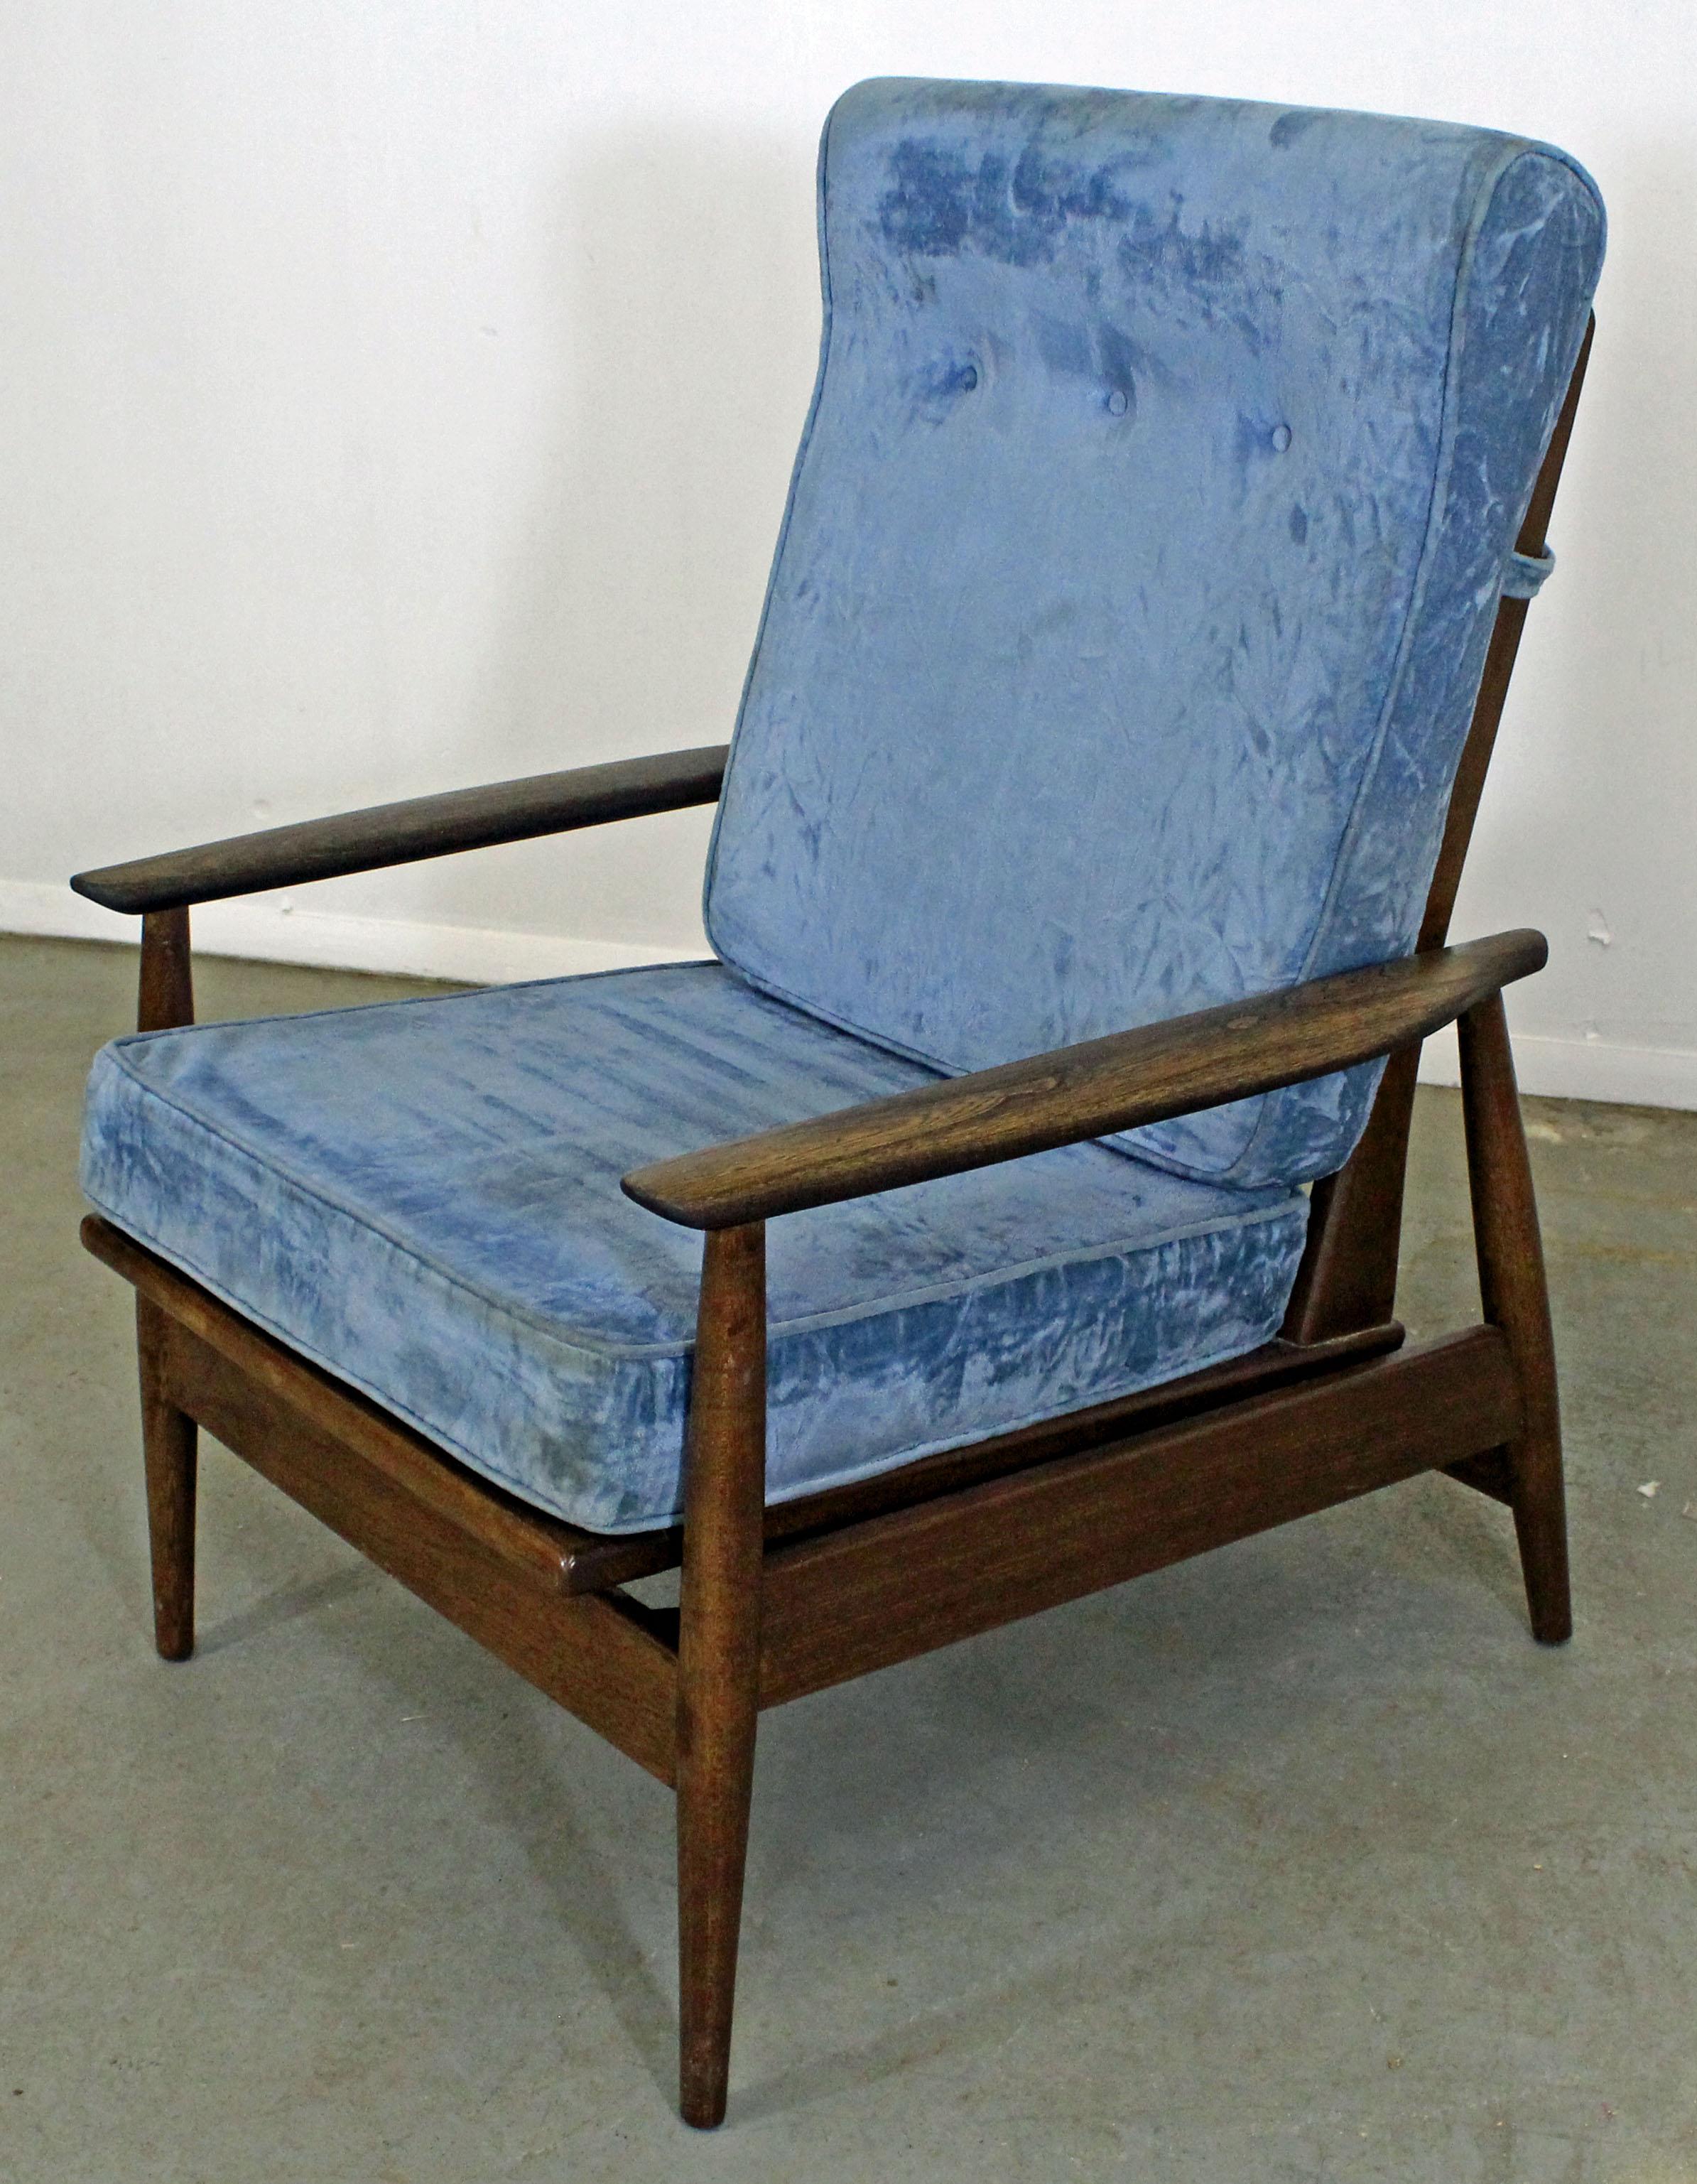 Offered is a Mid-Century Modern walnut lounge chair with a high-back and blue upholstered cushions. Has springs under the seat for rocking. It is in very good condition for its age (light stain on upholstery, minor surface scratches, wear--see